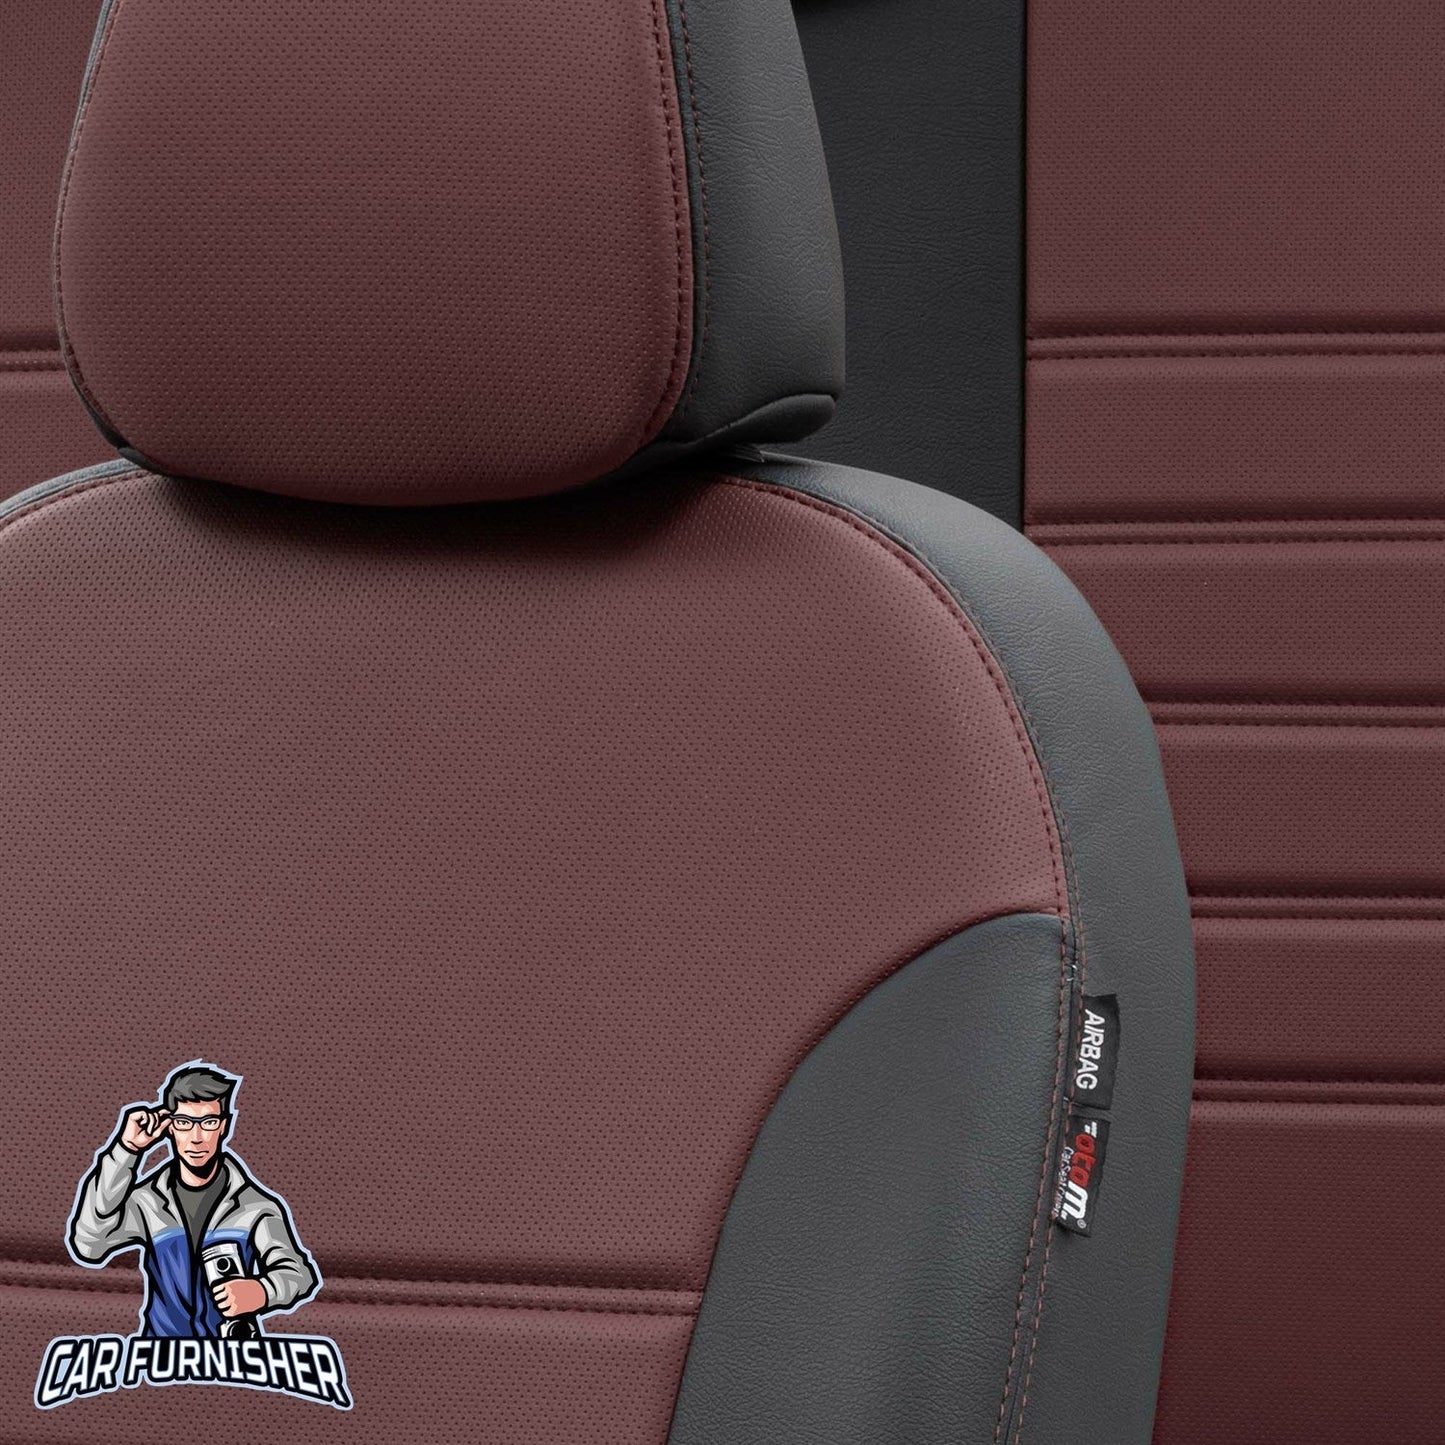 Hyundai Starex Seat Covers Istanbul Leather Design Burgundy Leather